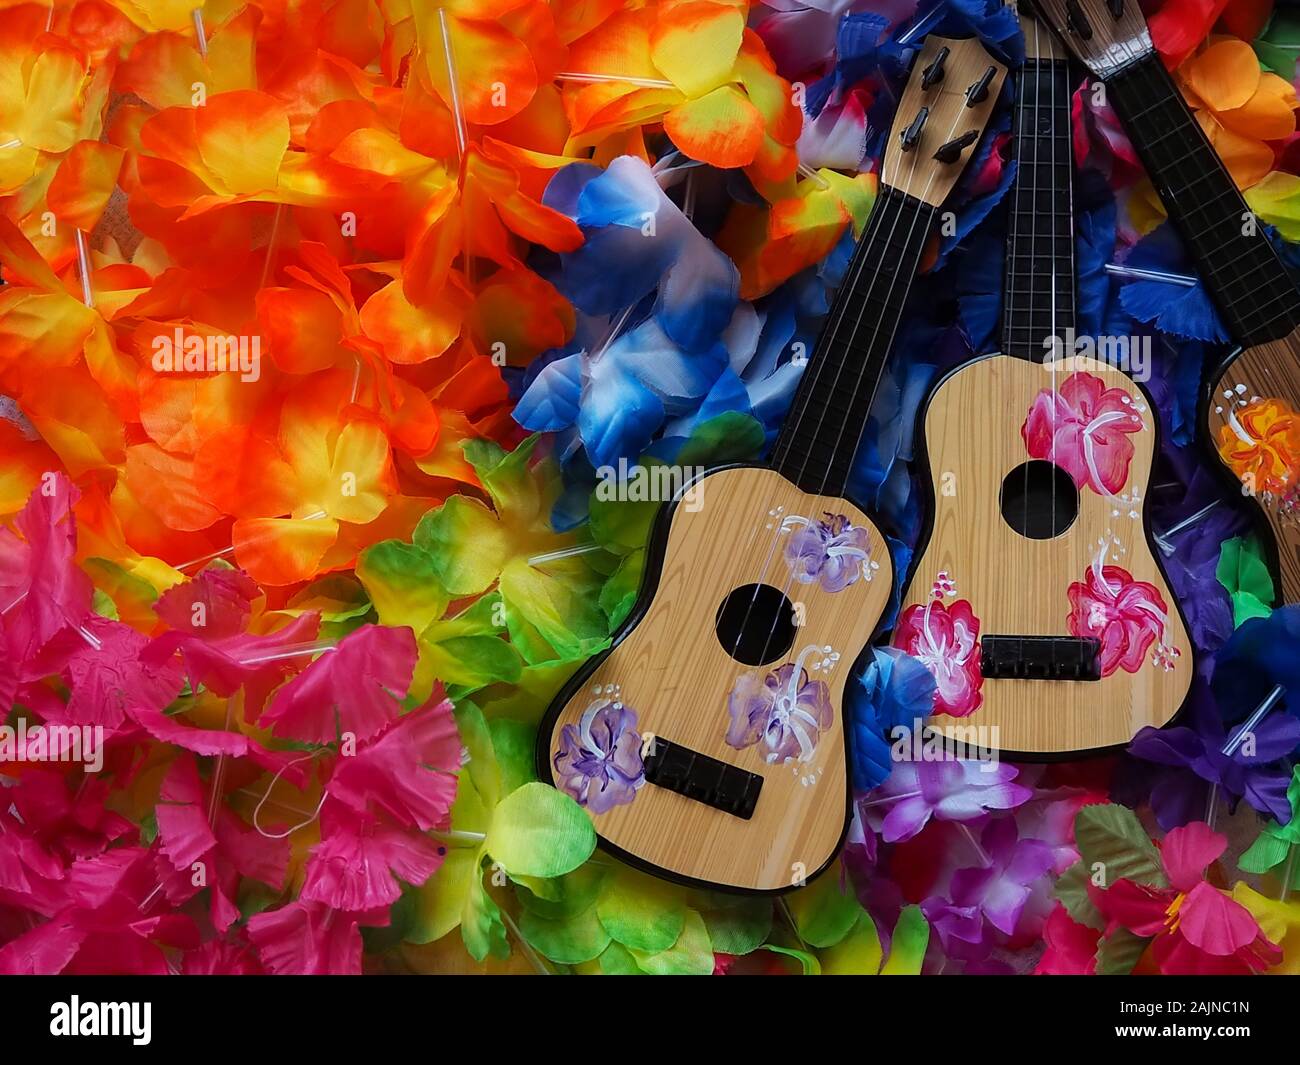 A collection of Hawaiian luau party decorations including two toy painted ukeleles on a bed of costume flower leis. Stock Photo